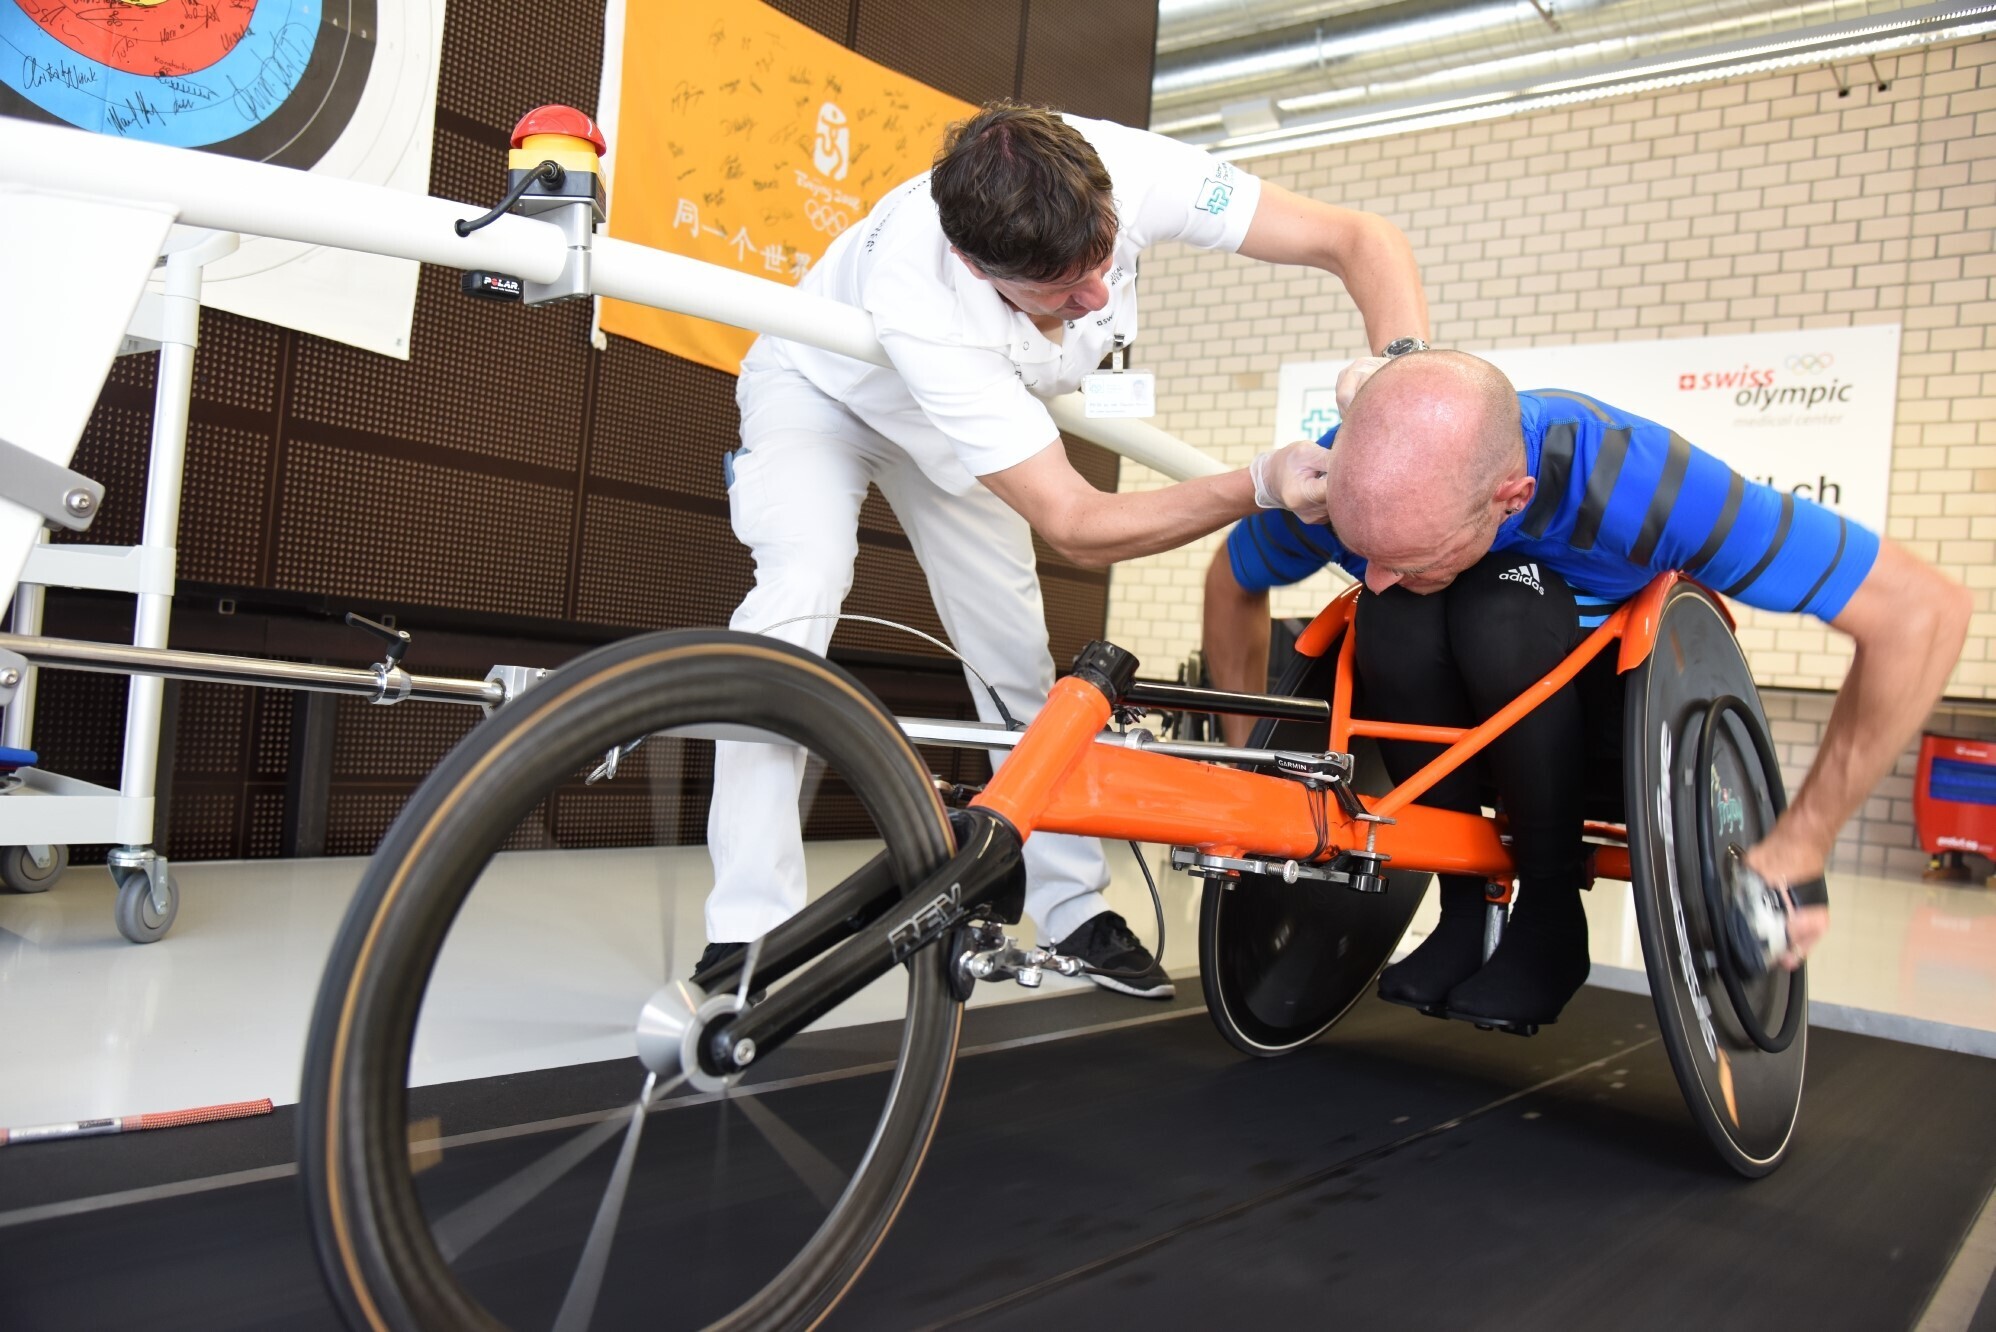 A man in a race wheelchair on a treadmill. Next to him, Claudio Perret is bending over to attach a measuring tool to the man's ear. They are in a sports laboratory room.